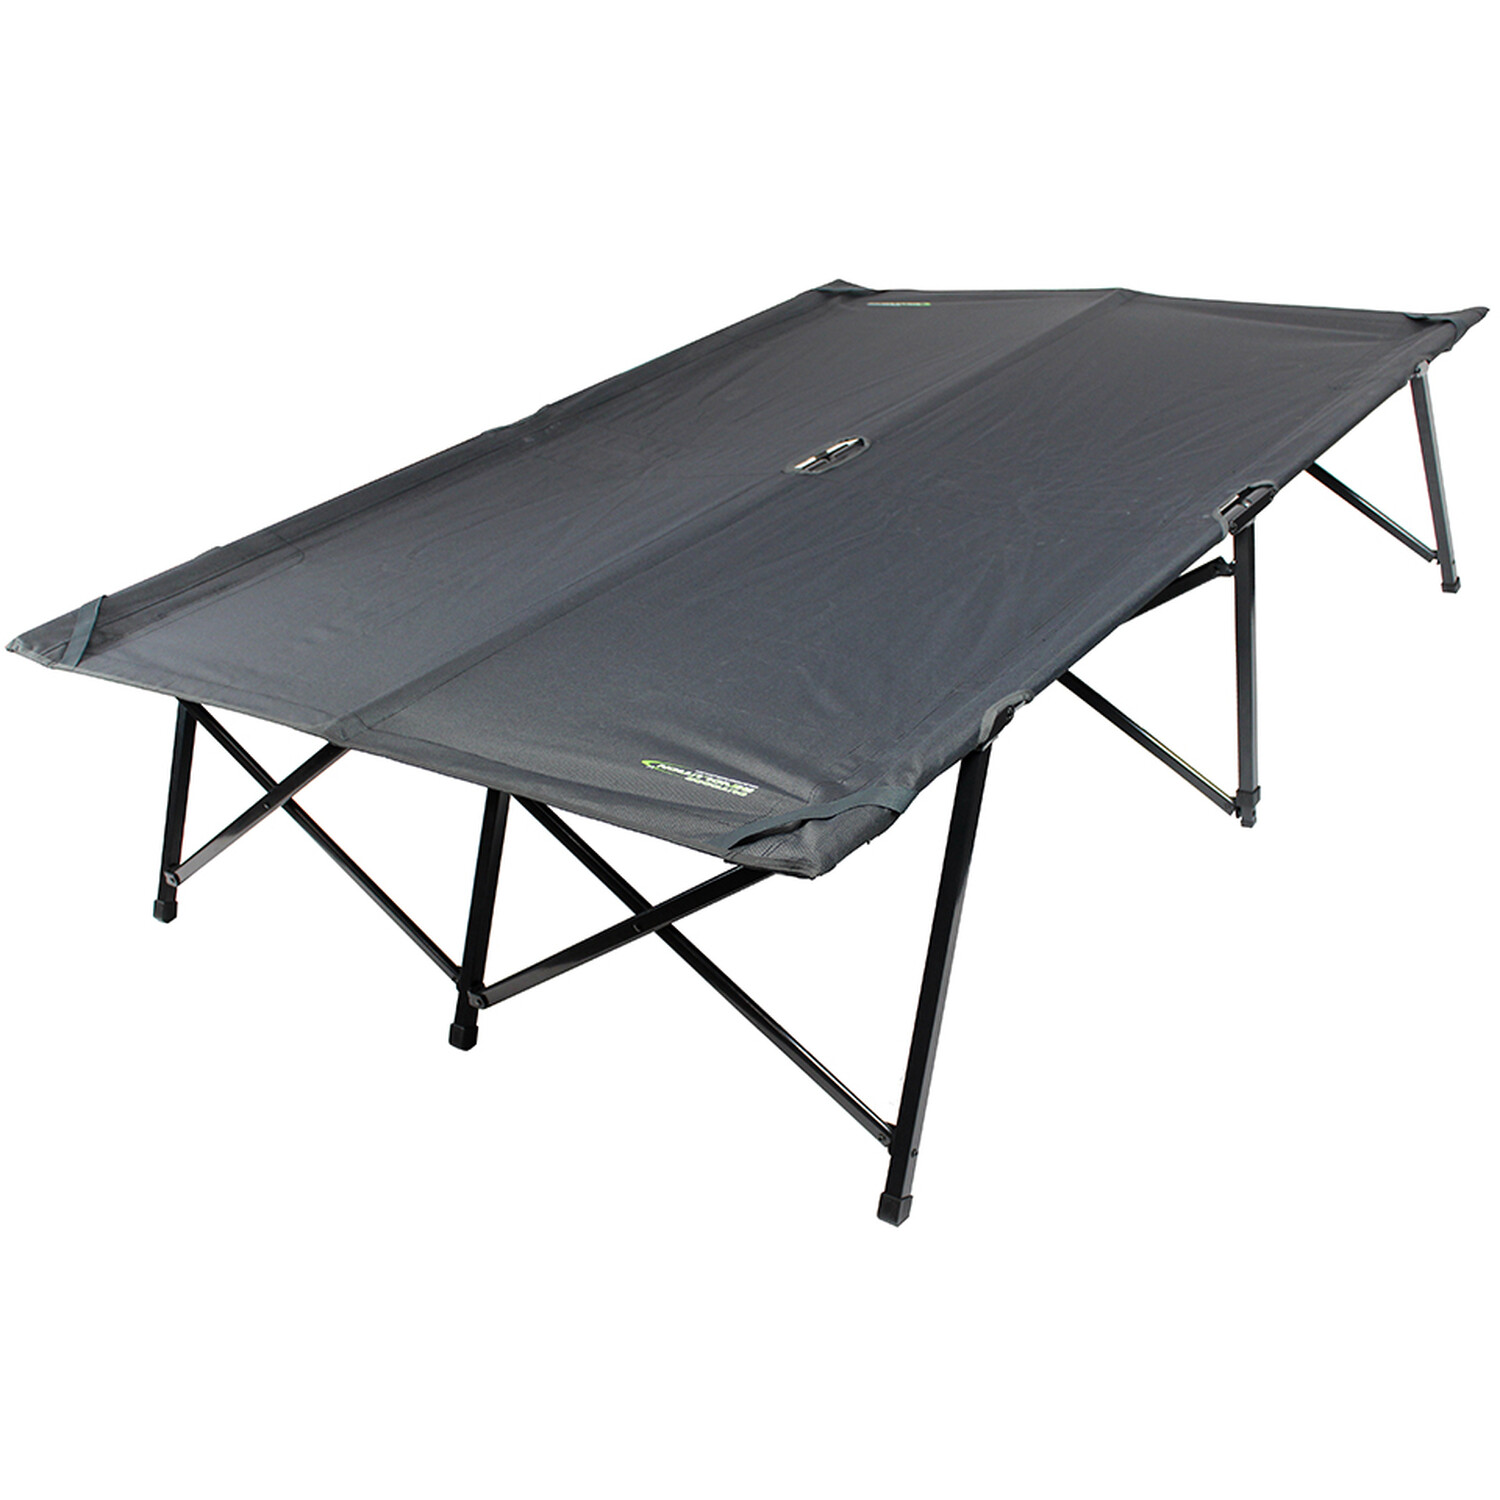 Outdoor Revolution Double Camping Bed - Black Image